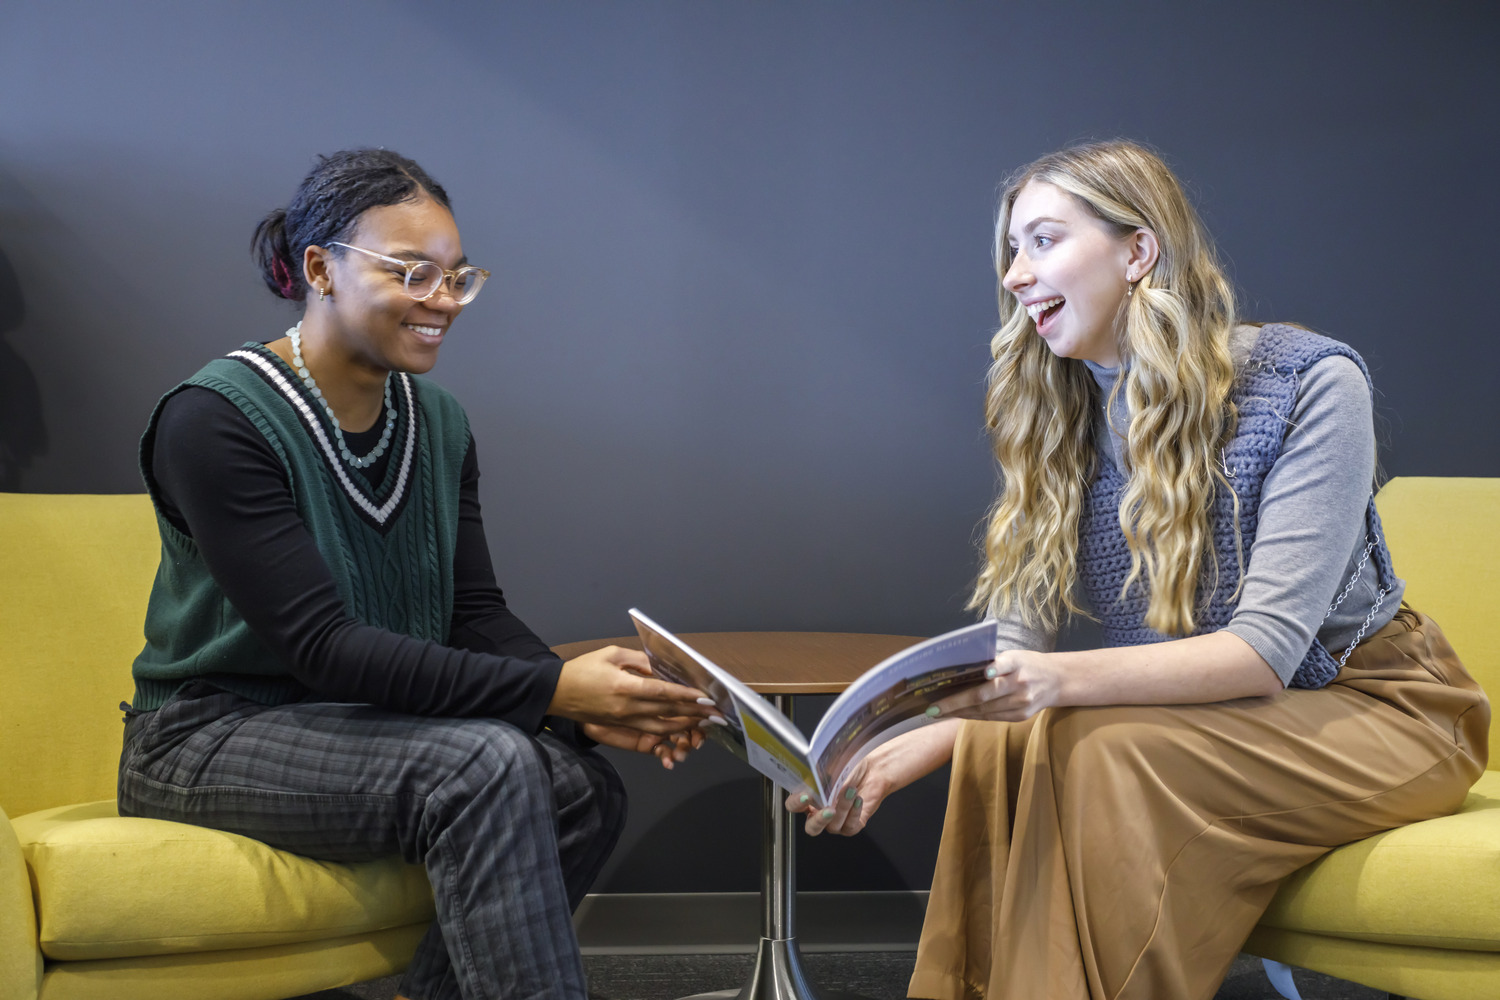 Image shows two women at CPL Pittsburgh, one is a young black woman with her hair pulled back wearing glasses and a green top sitting in a yellow chair next to a young white woman with long blonde hair wearing a gray top and mustard color pants. The two are having a conversation about the book the blonde woman is holding.